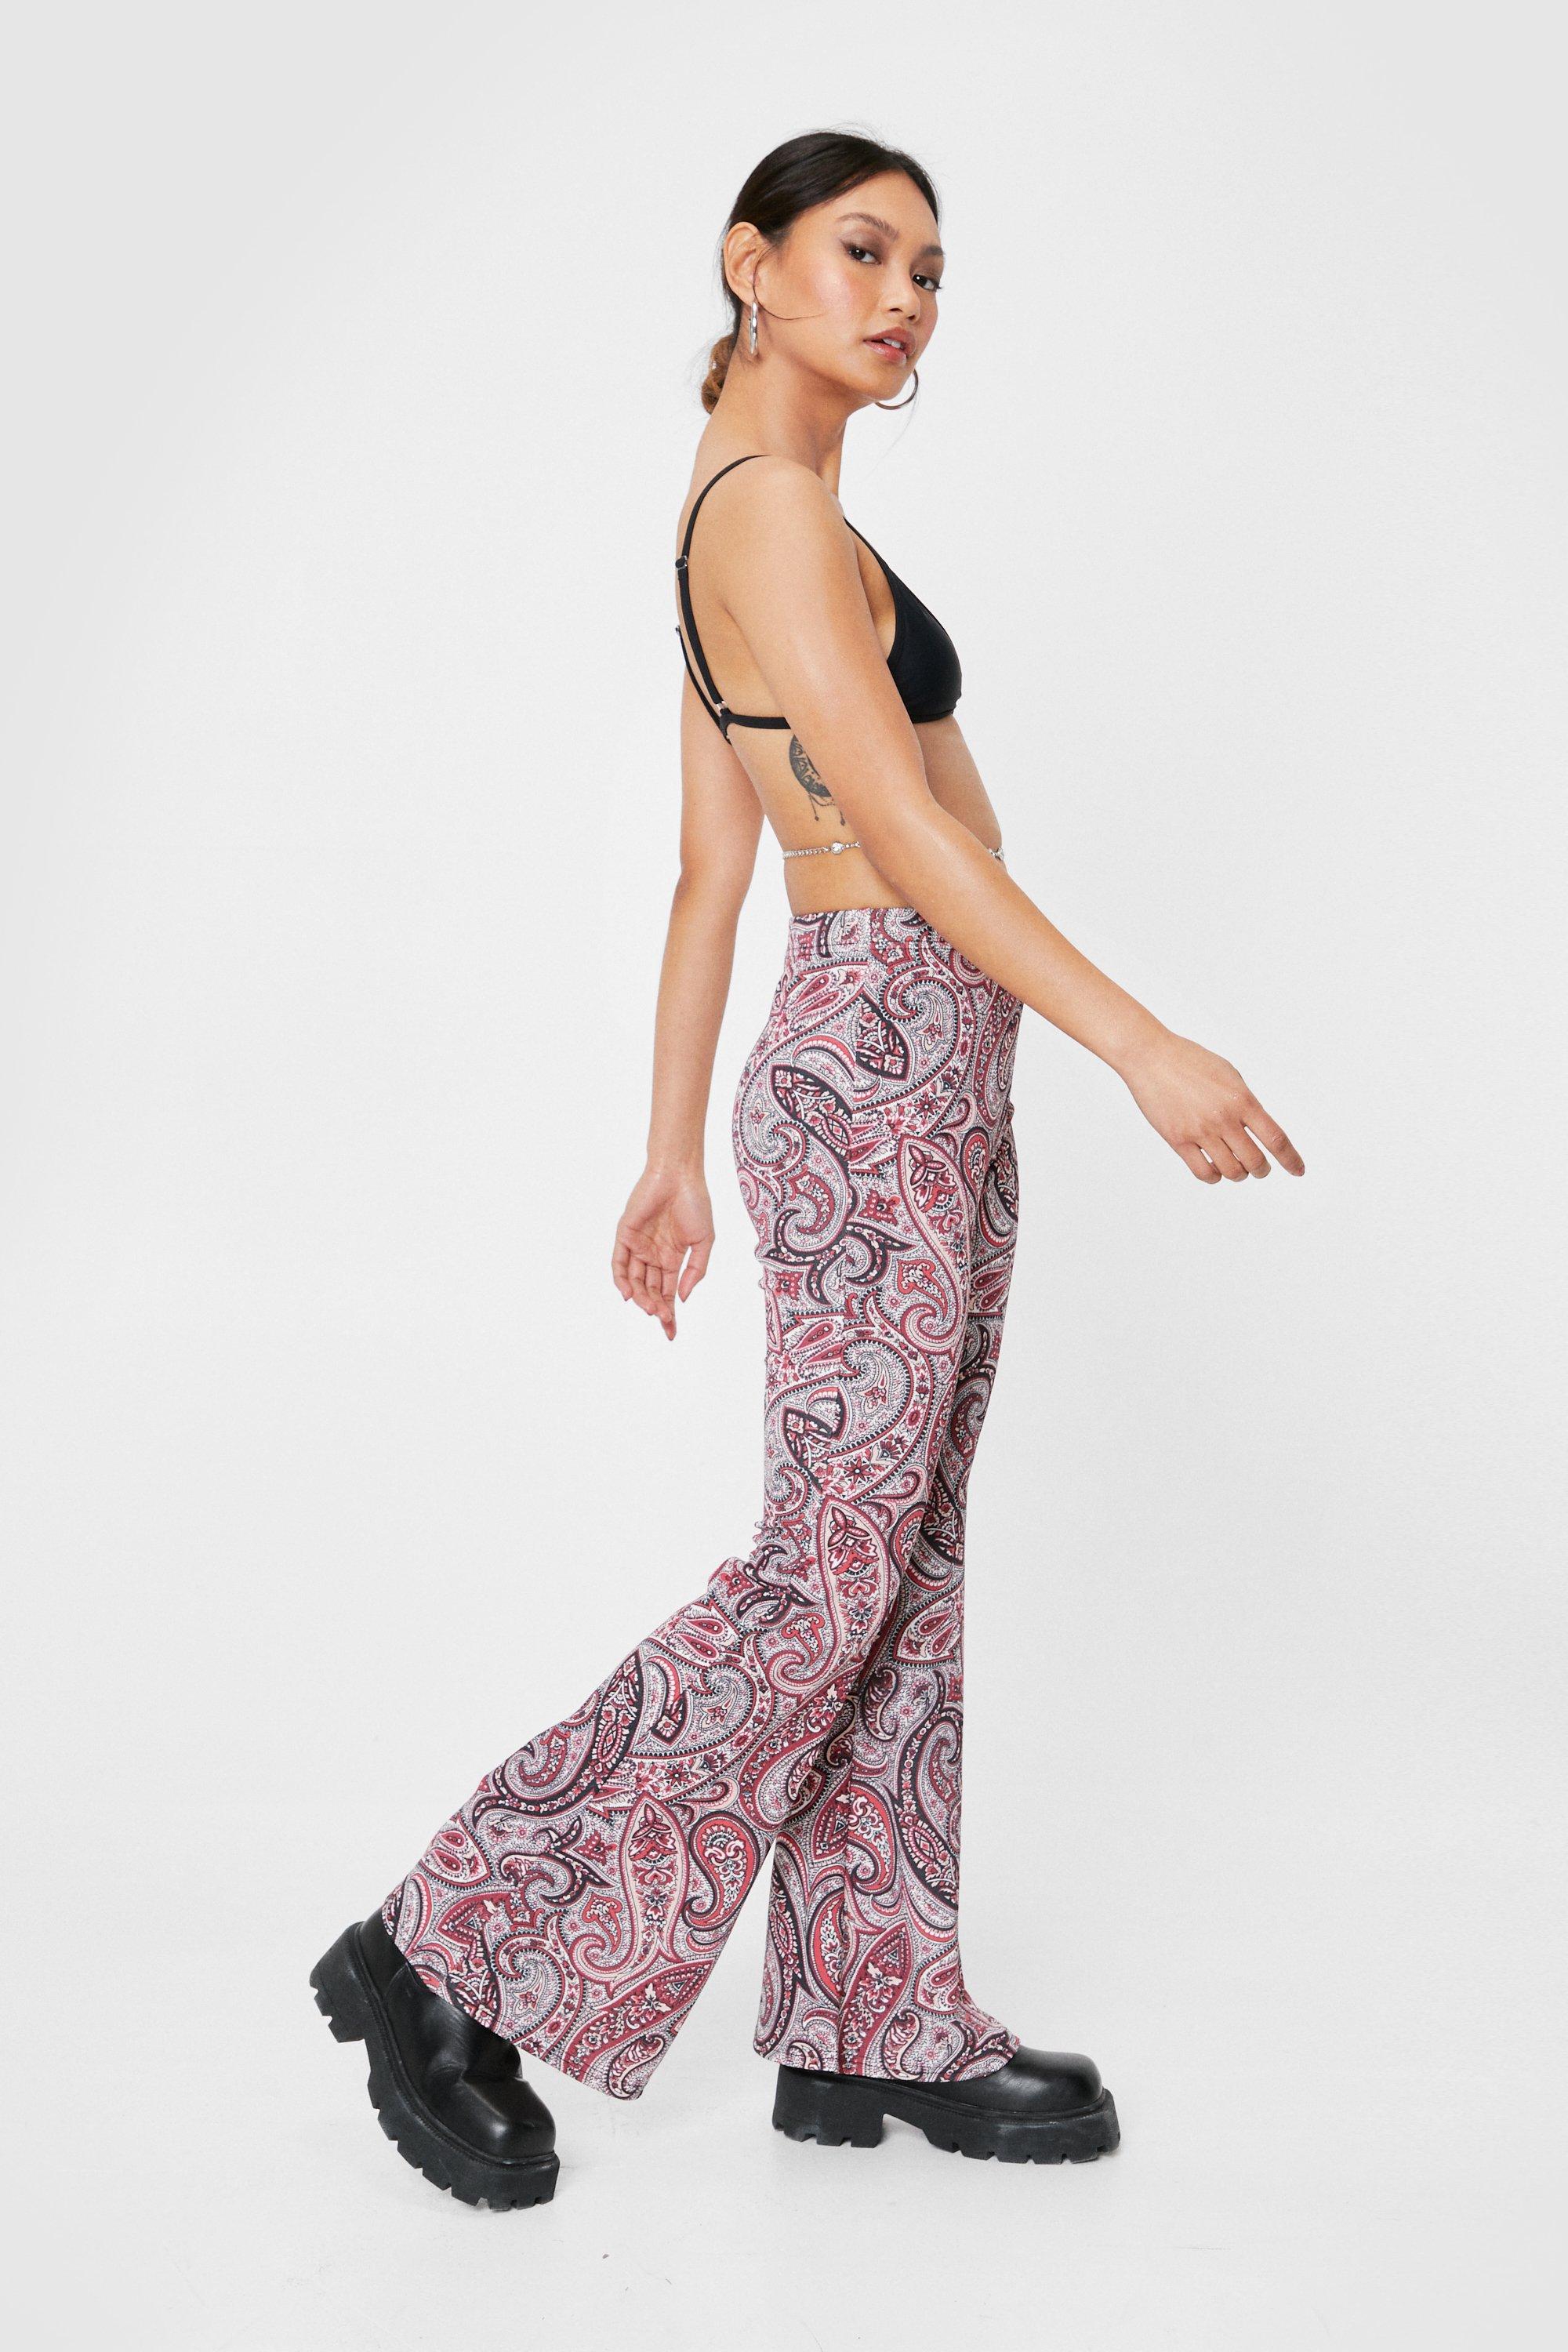 Urban Threads kick flare pants in 70s swirl print (part of a set